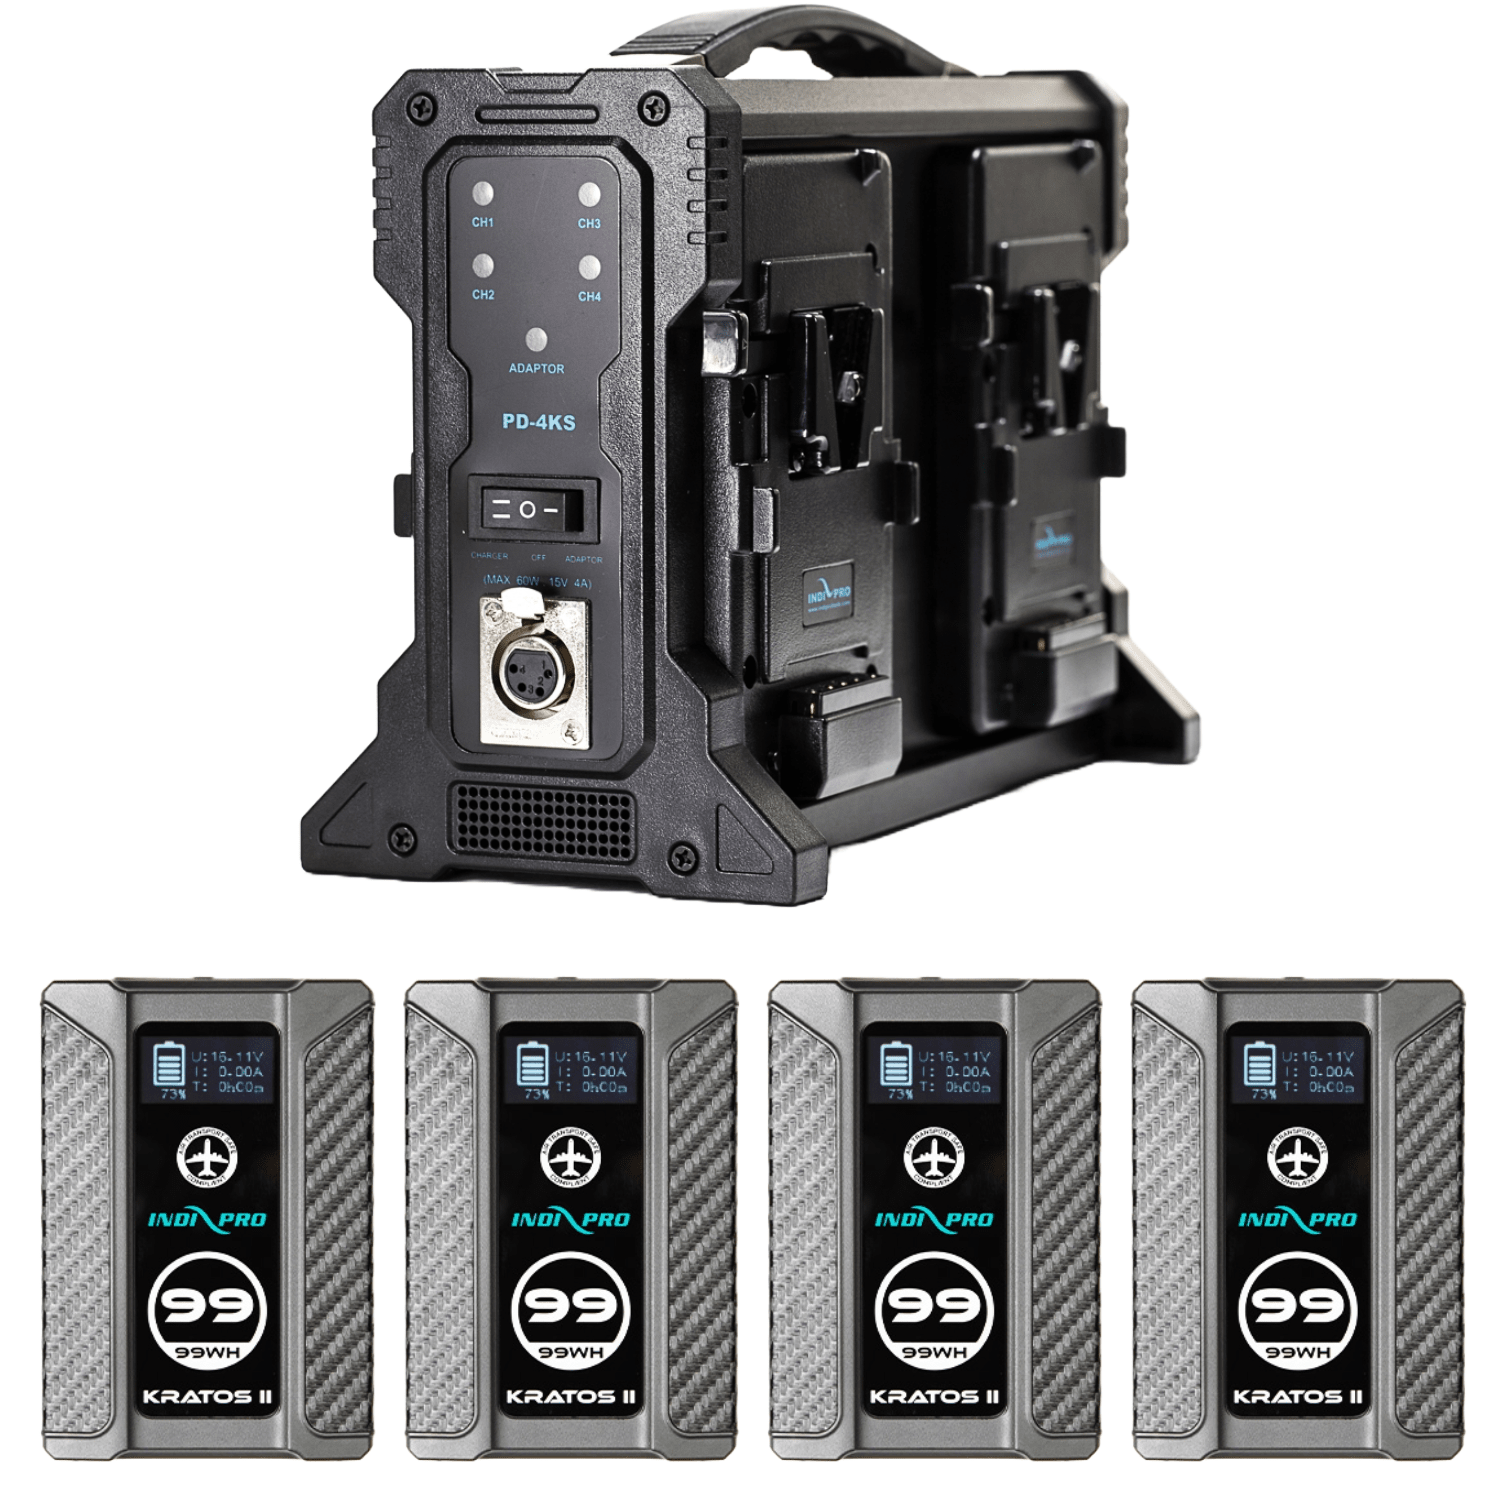 Kratos II (99Wh) 4-Battery Kit with Quad Pro Charger (V-Mount) Battery Kit Indipro 